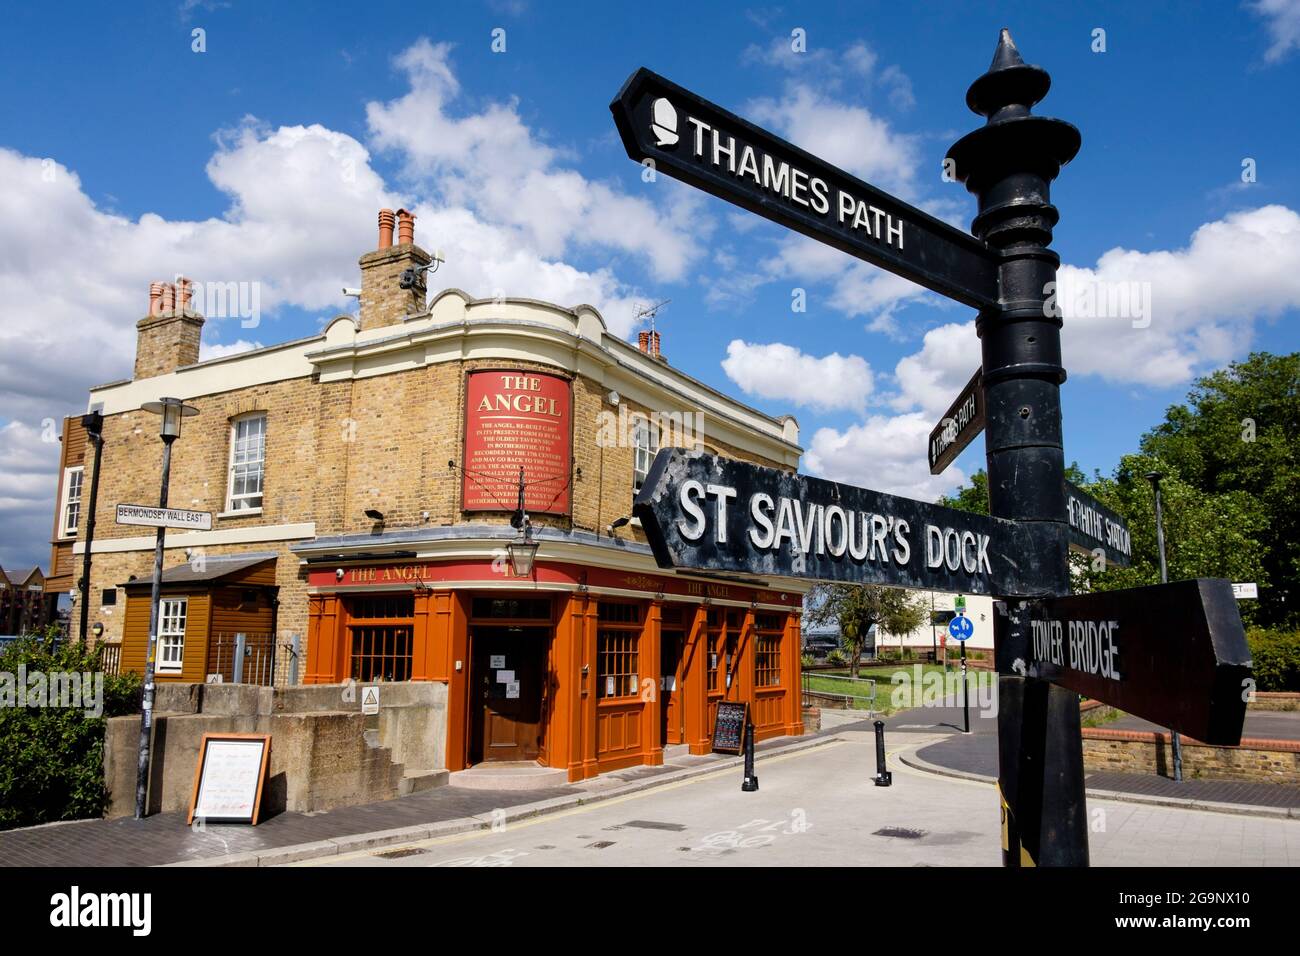 The Angel historic riverside pub on the River Thames, Rotherhithe, South London, UK Stock Photo